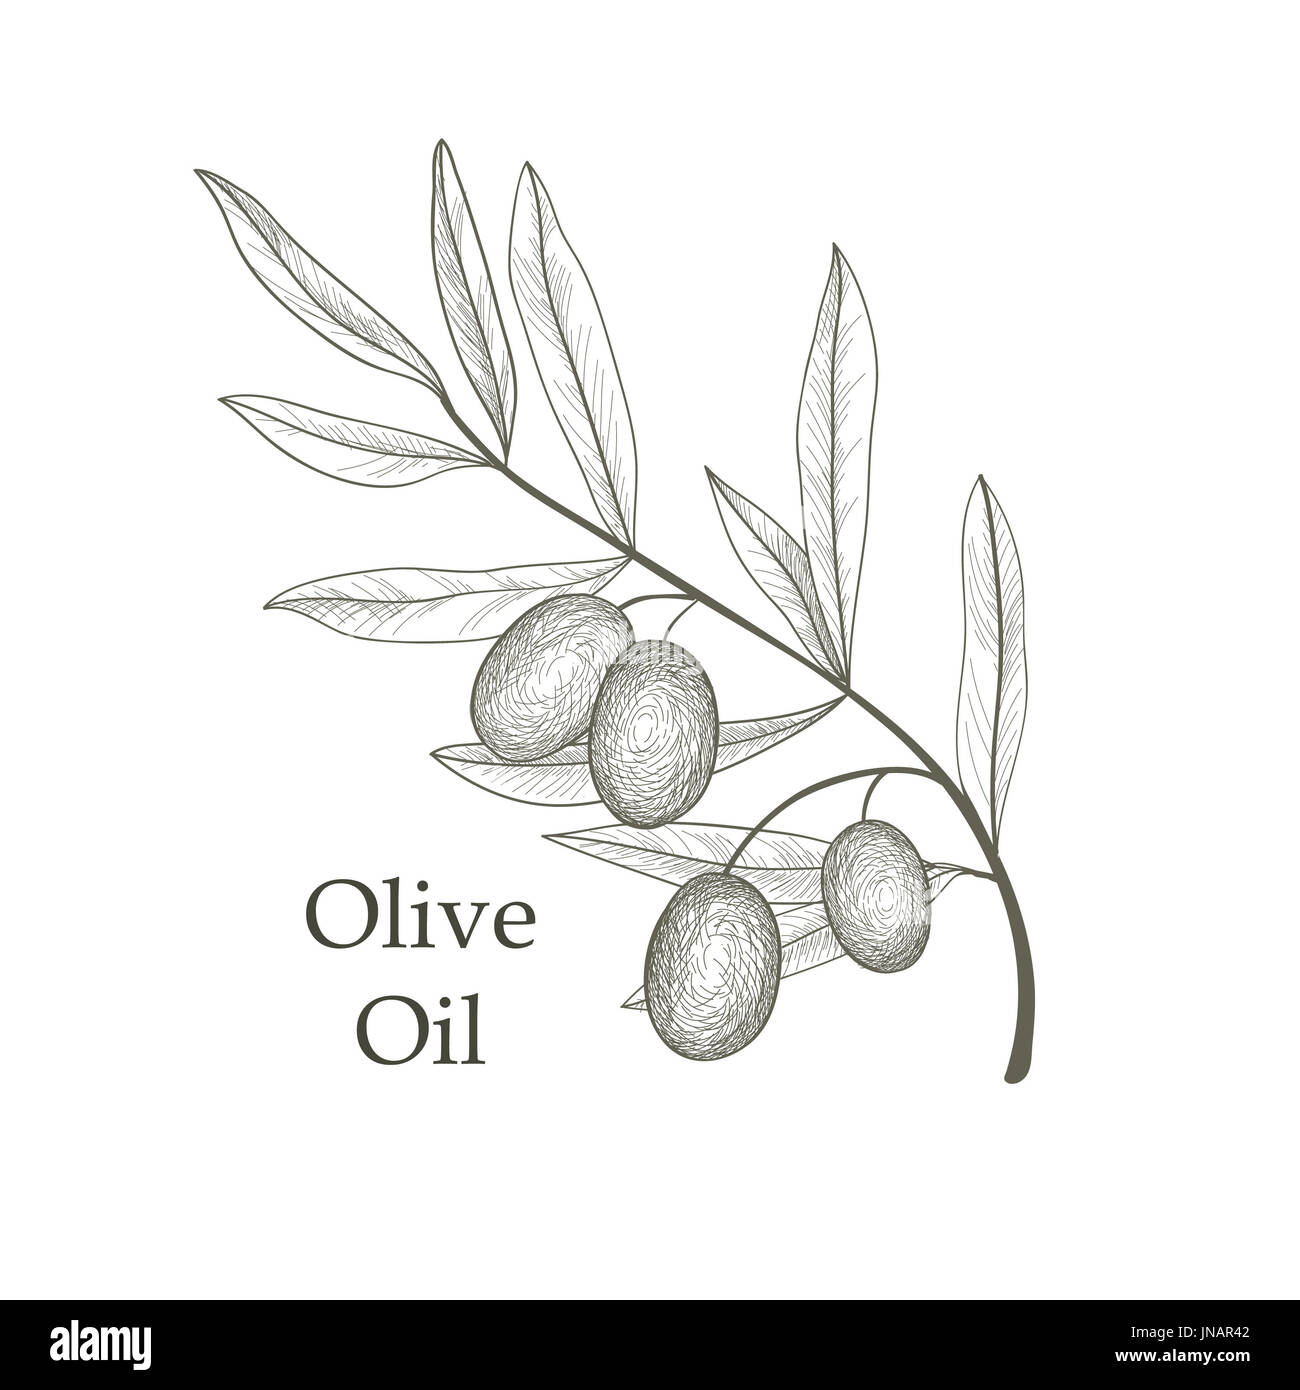 Olive tree branch with olives isolated sketch over white background Retro olive branch engraving Vector illustration Stock Photo